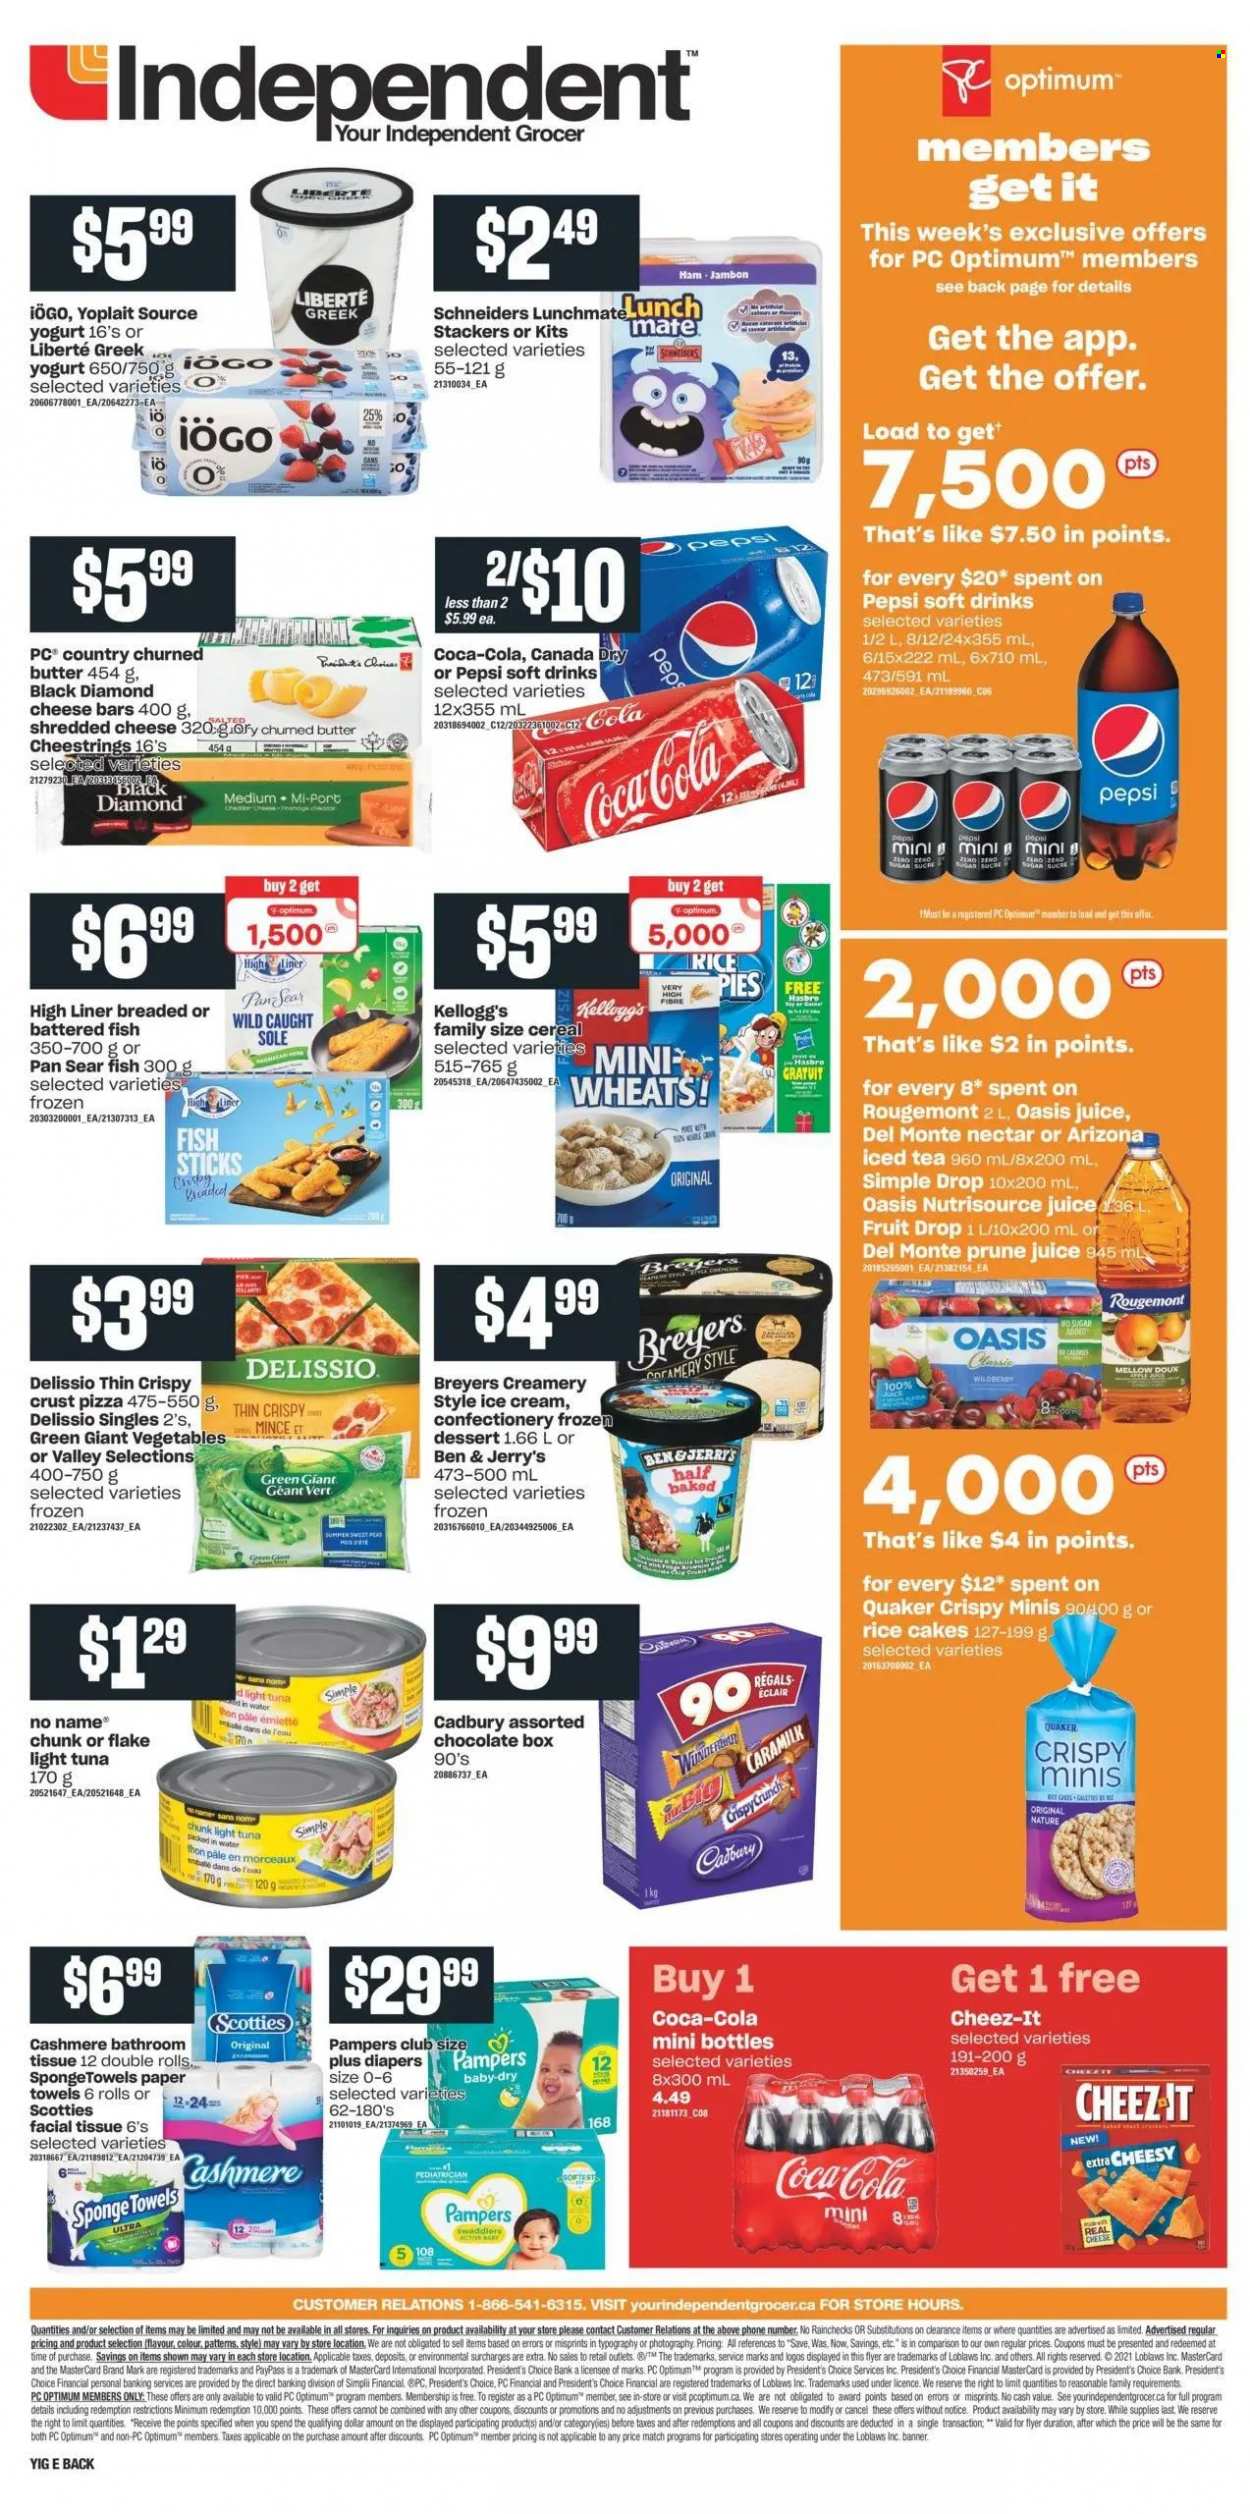 thumbnail - Independent Flyer - October 14, 2021 - October 20, 2021 - Sales products - peas, tuna, fish, fish fingers, No Name, fish sticks, pizza, Quaker, ham, shredded cheese, string cheese, Président, greek yoghurt, yoghurt, Yoplait, butter, ice cream, Ben & Jerry's, Kellogg's, Cadbury, Cheez-It, tuna in water, light tuna, cereals, Canada Dry, Coca-Cola, Pepsi, juice, ice tea, soft drink, AriZona, nappies, bath tissue, kitchen towels, paper towels, sponge, pan, Optimum, NutriSource, Pampers. Page 2.